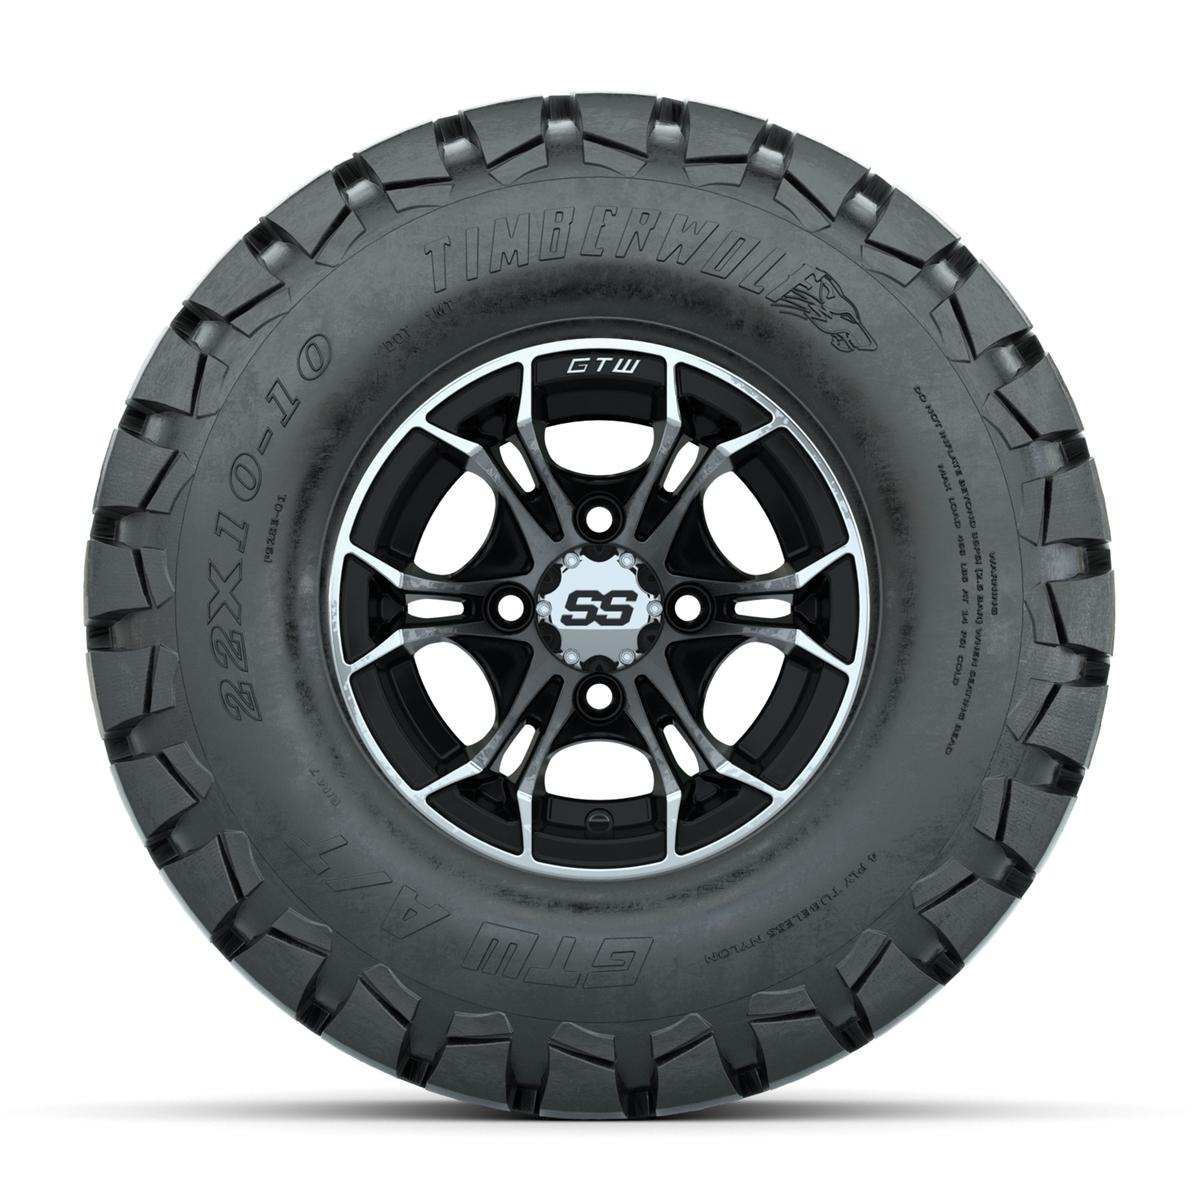 GTW Spyder Machined/Black 10 in Wheels with 22x10-10 Timberwolf All Terrain Tires – Full Set